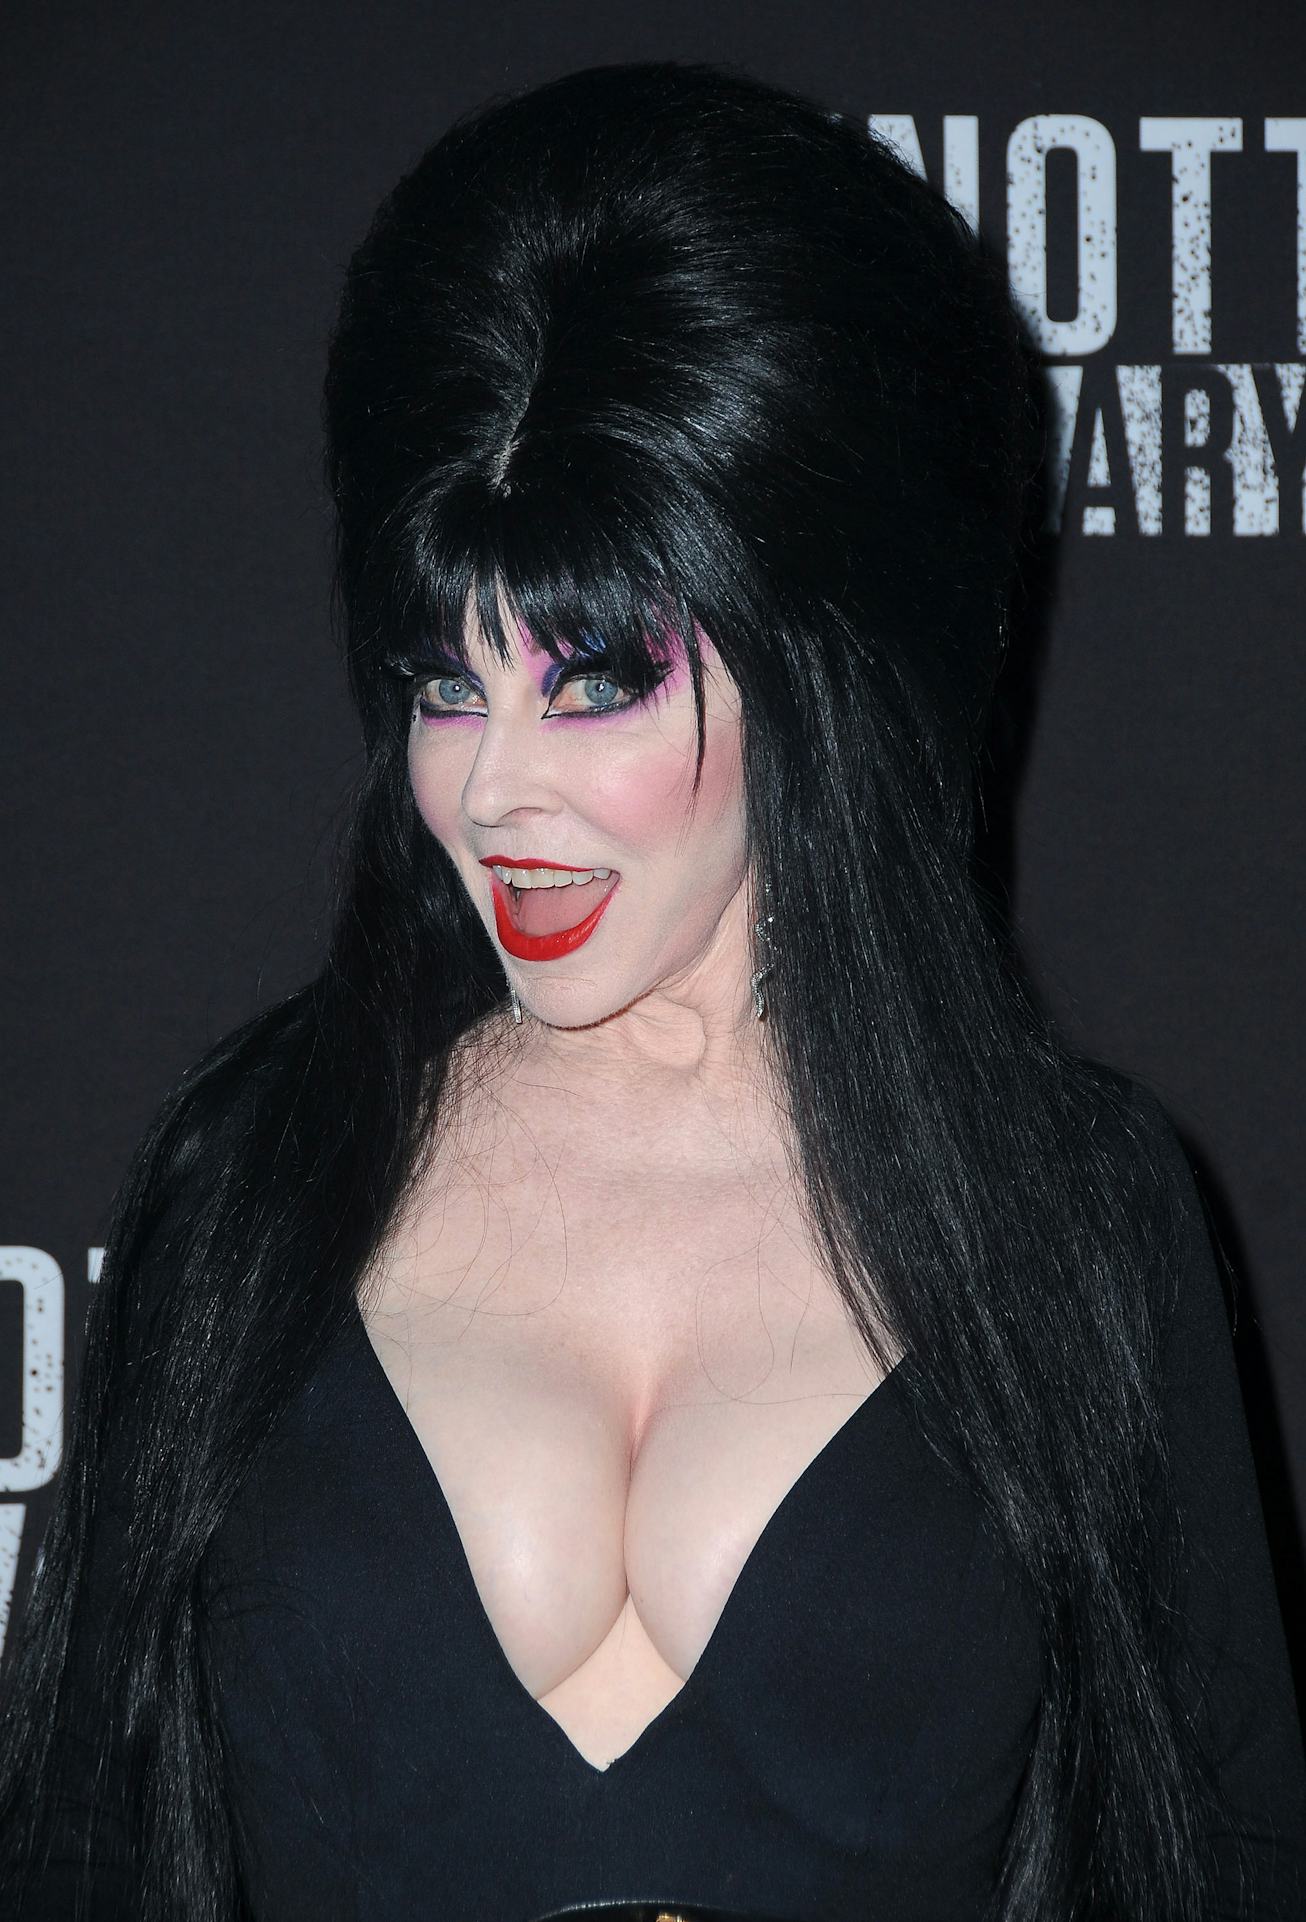 Cassandra Peterson, aka Elvira, came out as bisexual in her new memoir